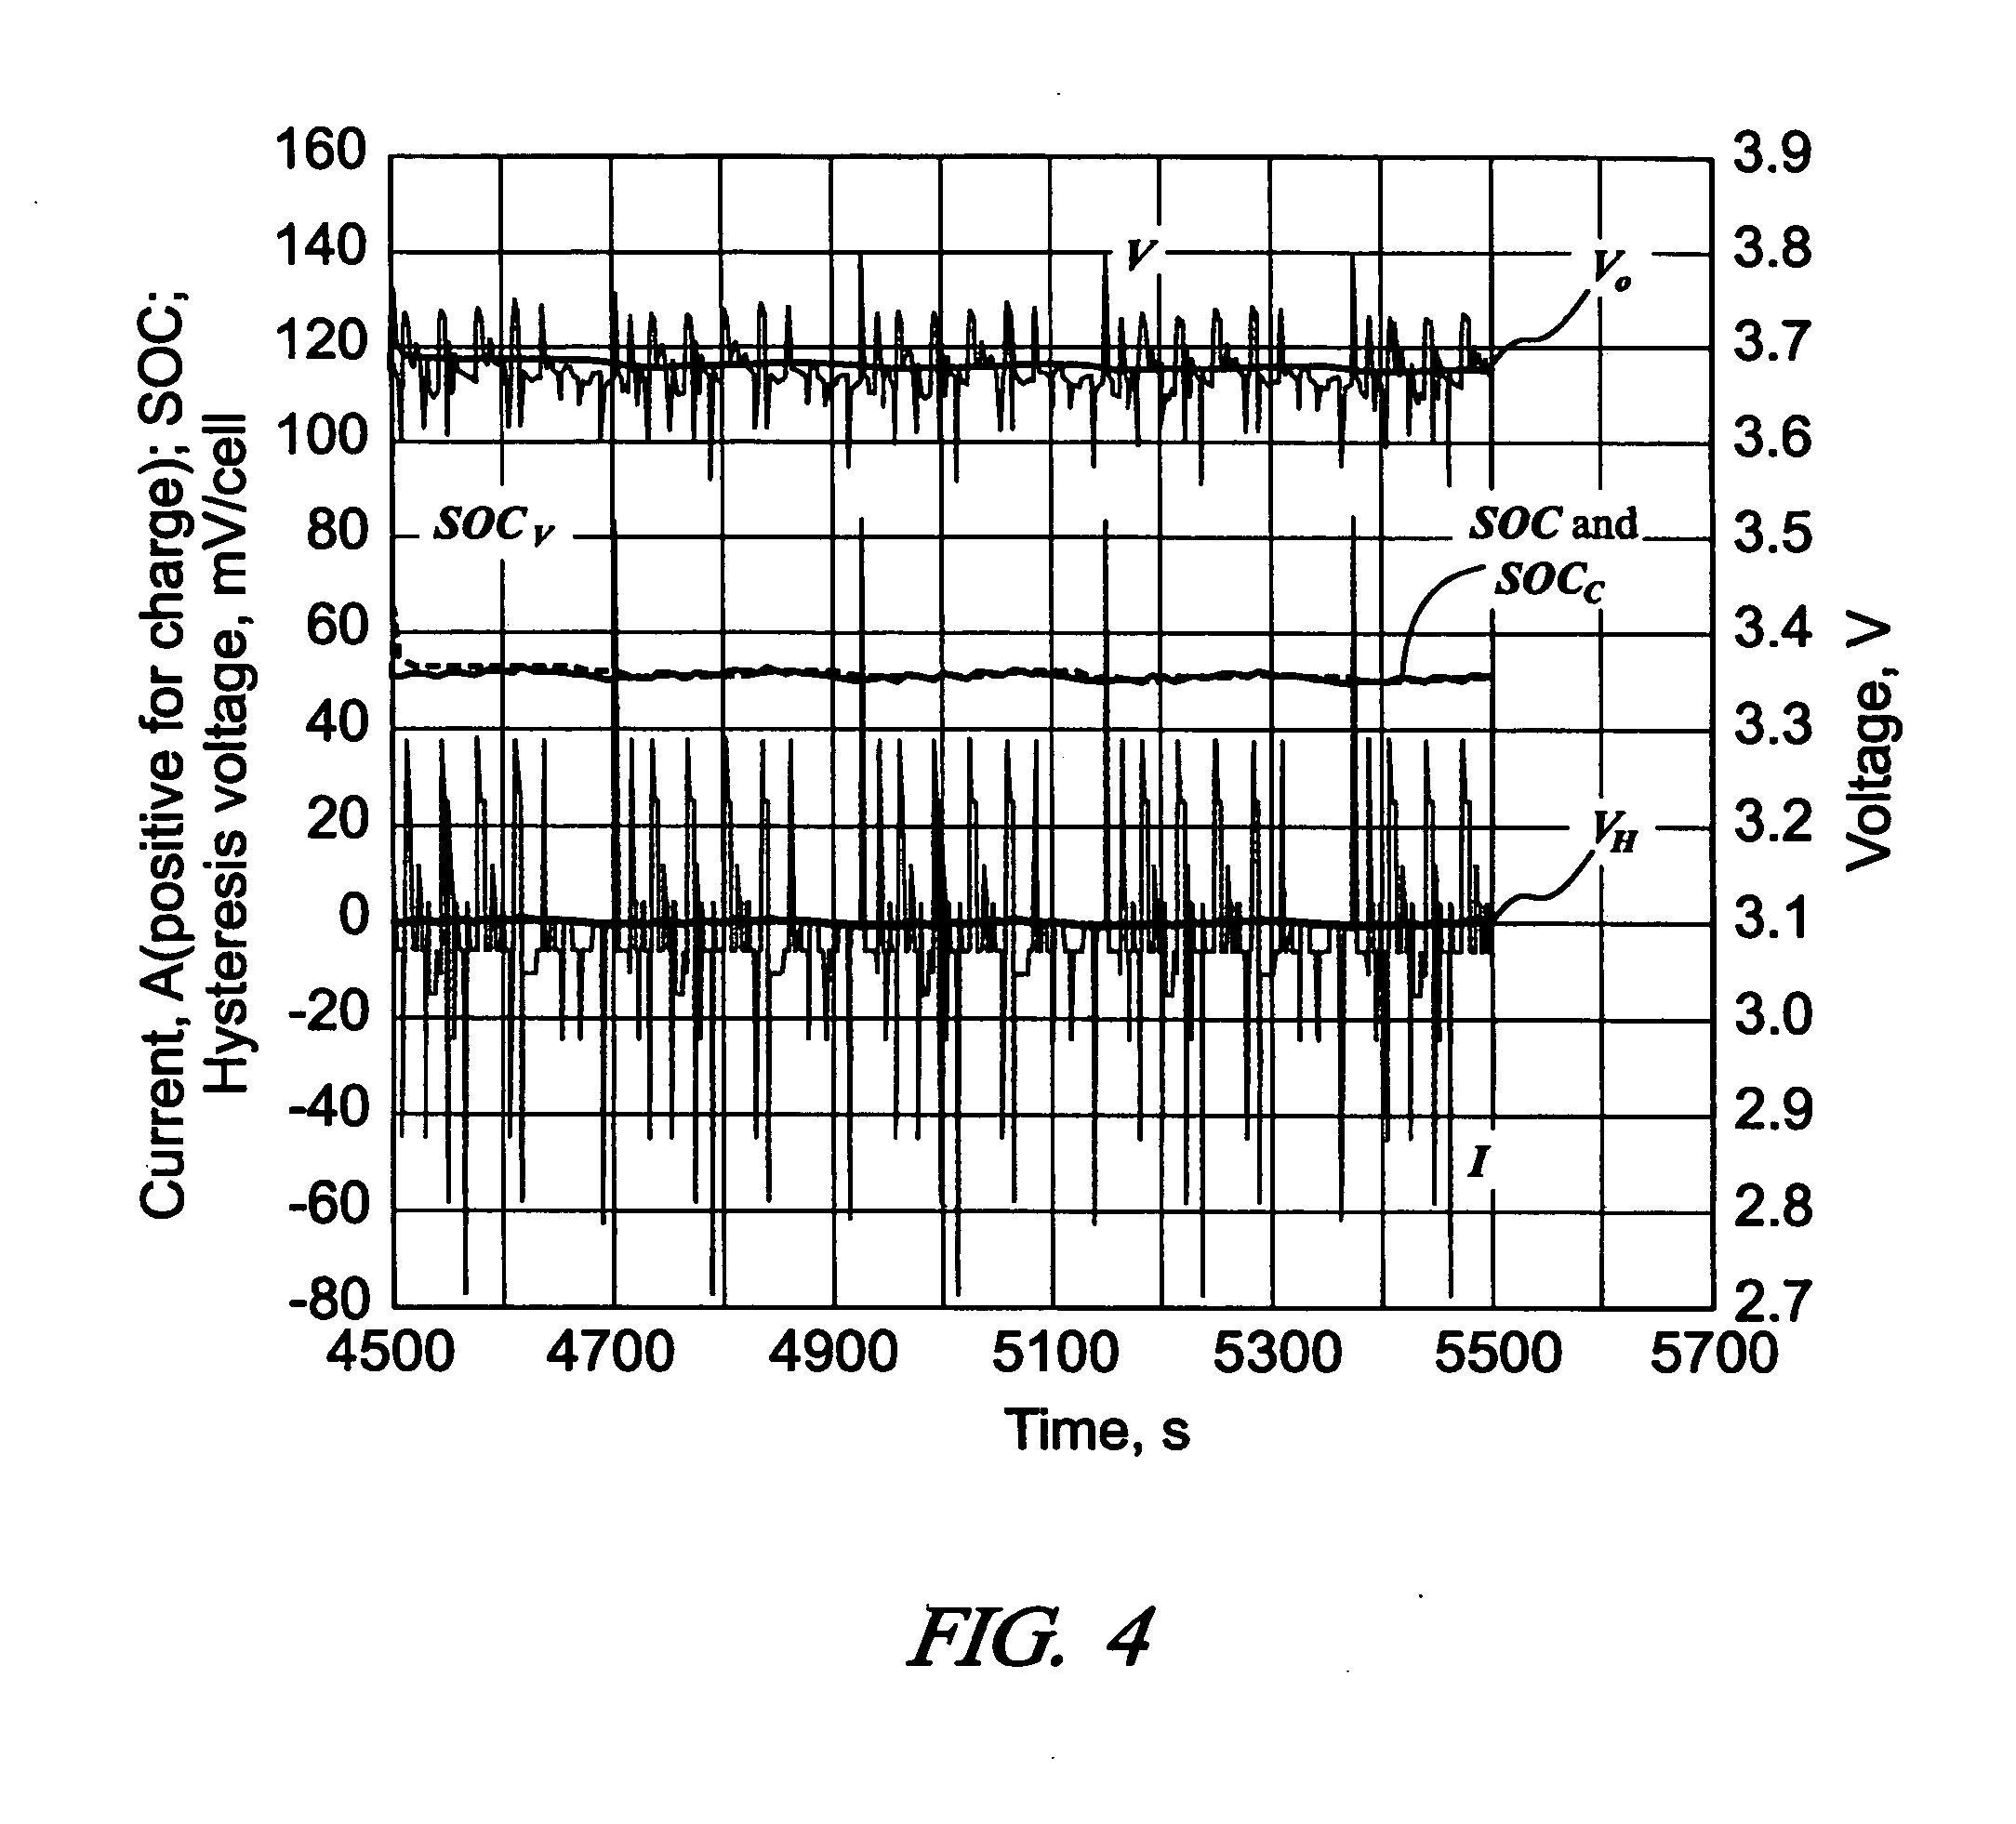 Method for control and monitoring using a state estimator having variable forgetting factors